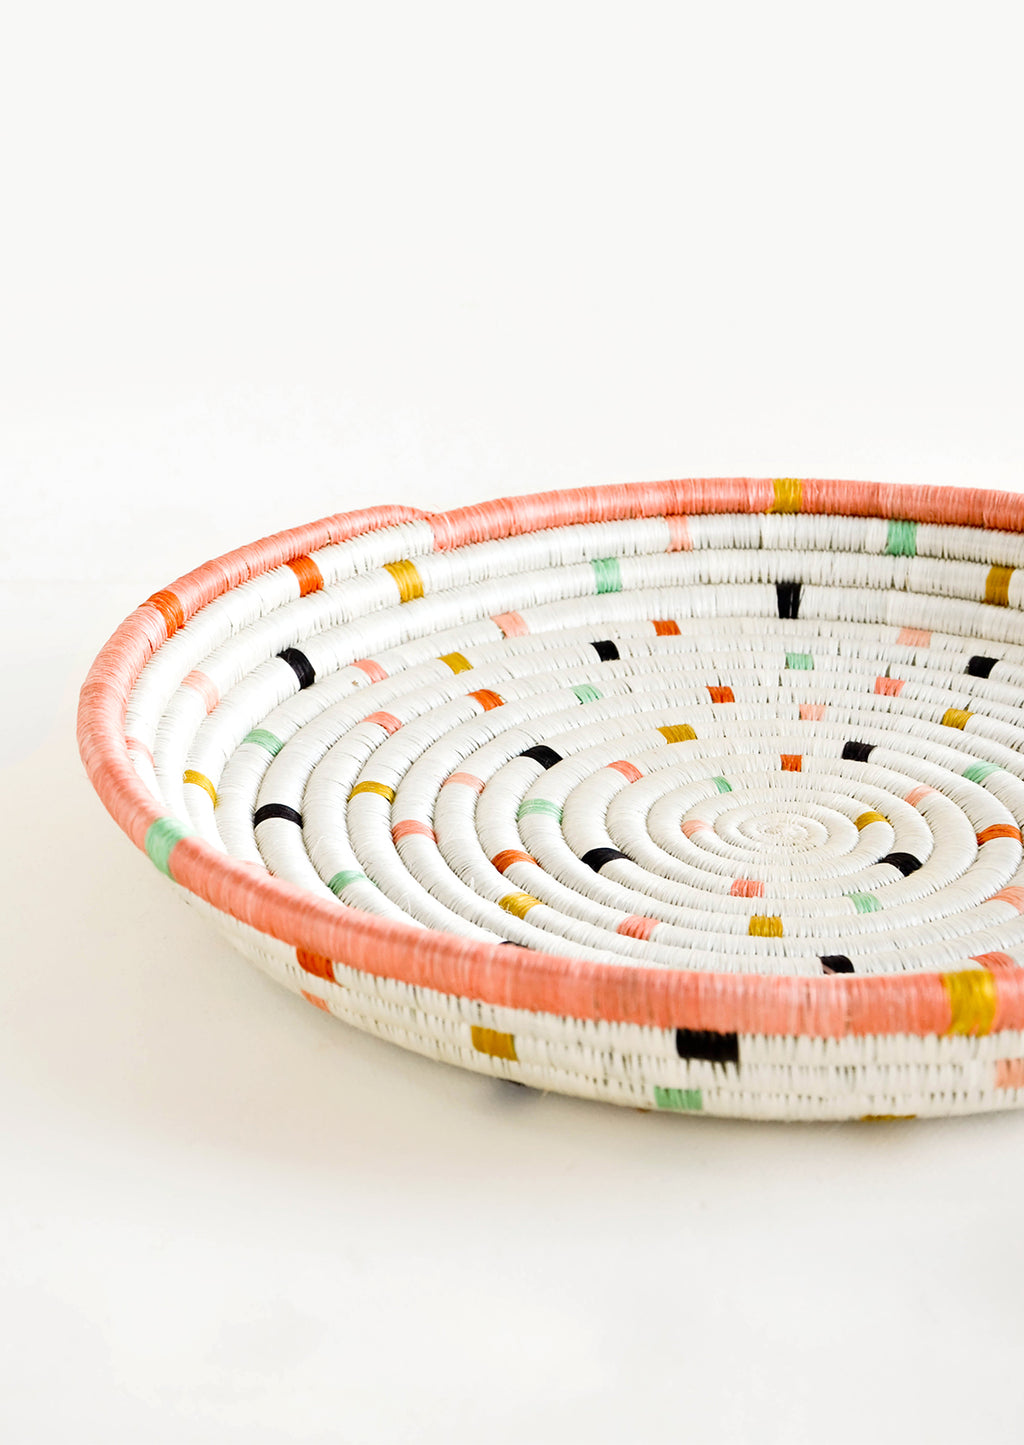 2: Round, shallow serving tray made from woven sweetgrass. Ivory with pastel colored dashes and peach rim.